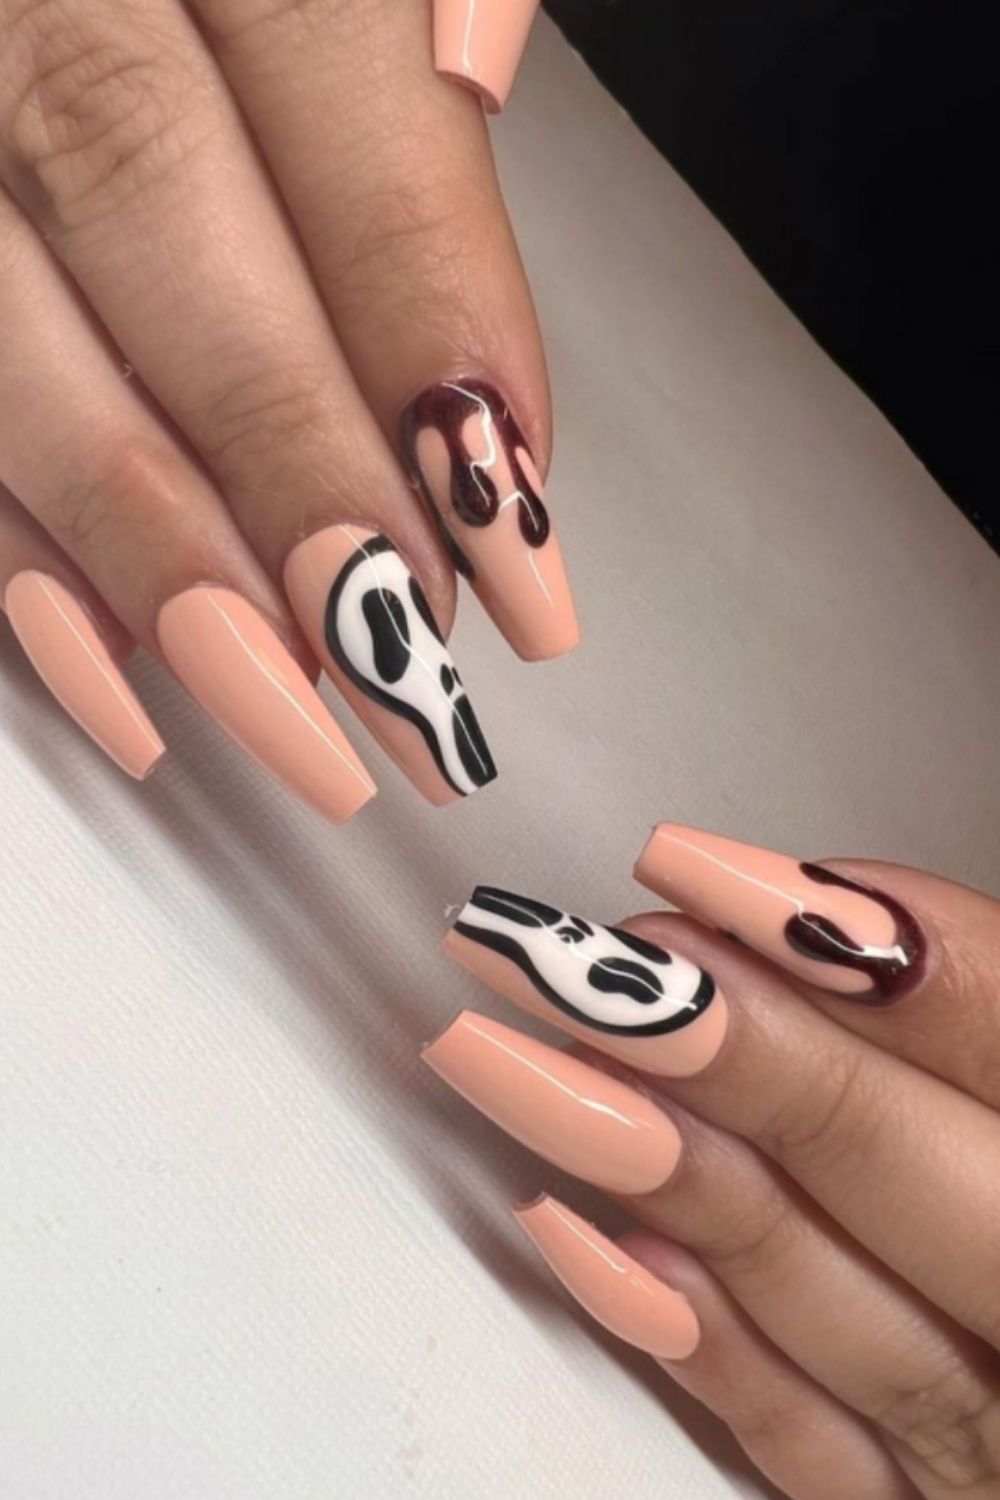 Pink and black coffin nails art